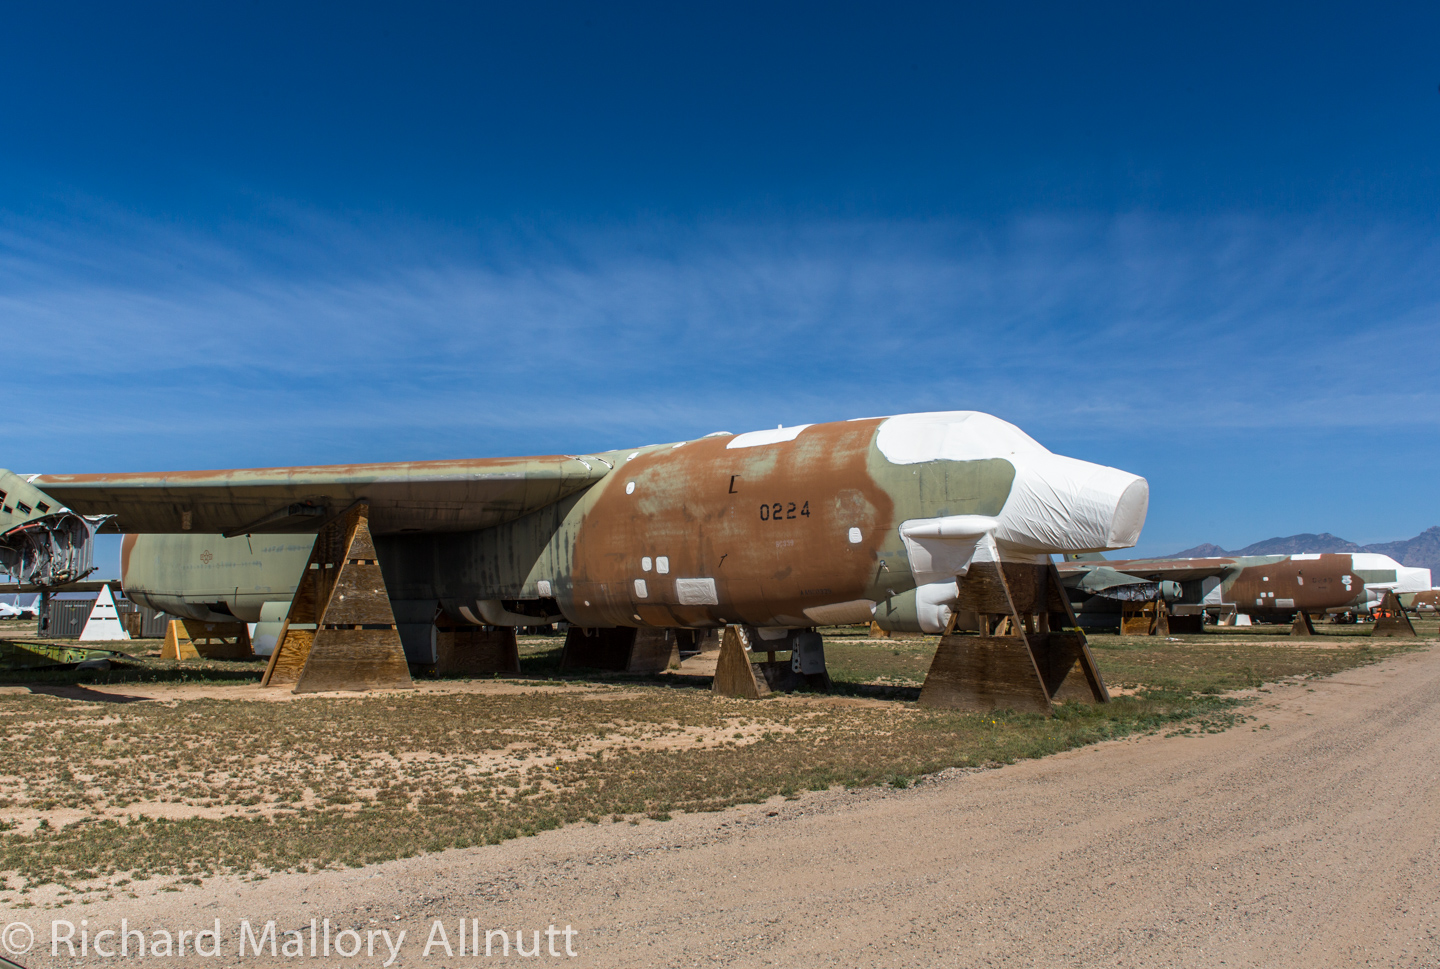 Some of the many chopped up B-52s remaining at AMARG. Even though these aircraft were purposefully rendered irretrievably ground-bound, they still contain many valuable parts to keep the active fleet flying, which is the reason so many are kept beyond the necessary waiting time for the Russians to verify their destruction. (photo by Richard Mallory Allnutt)